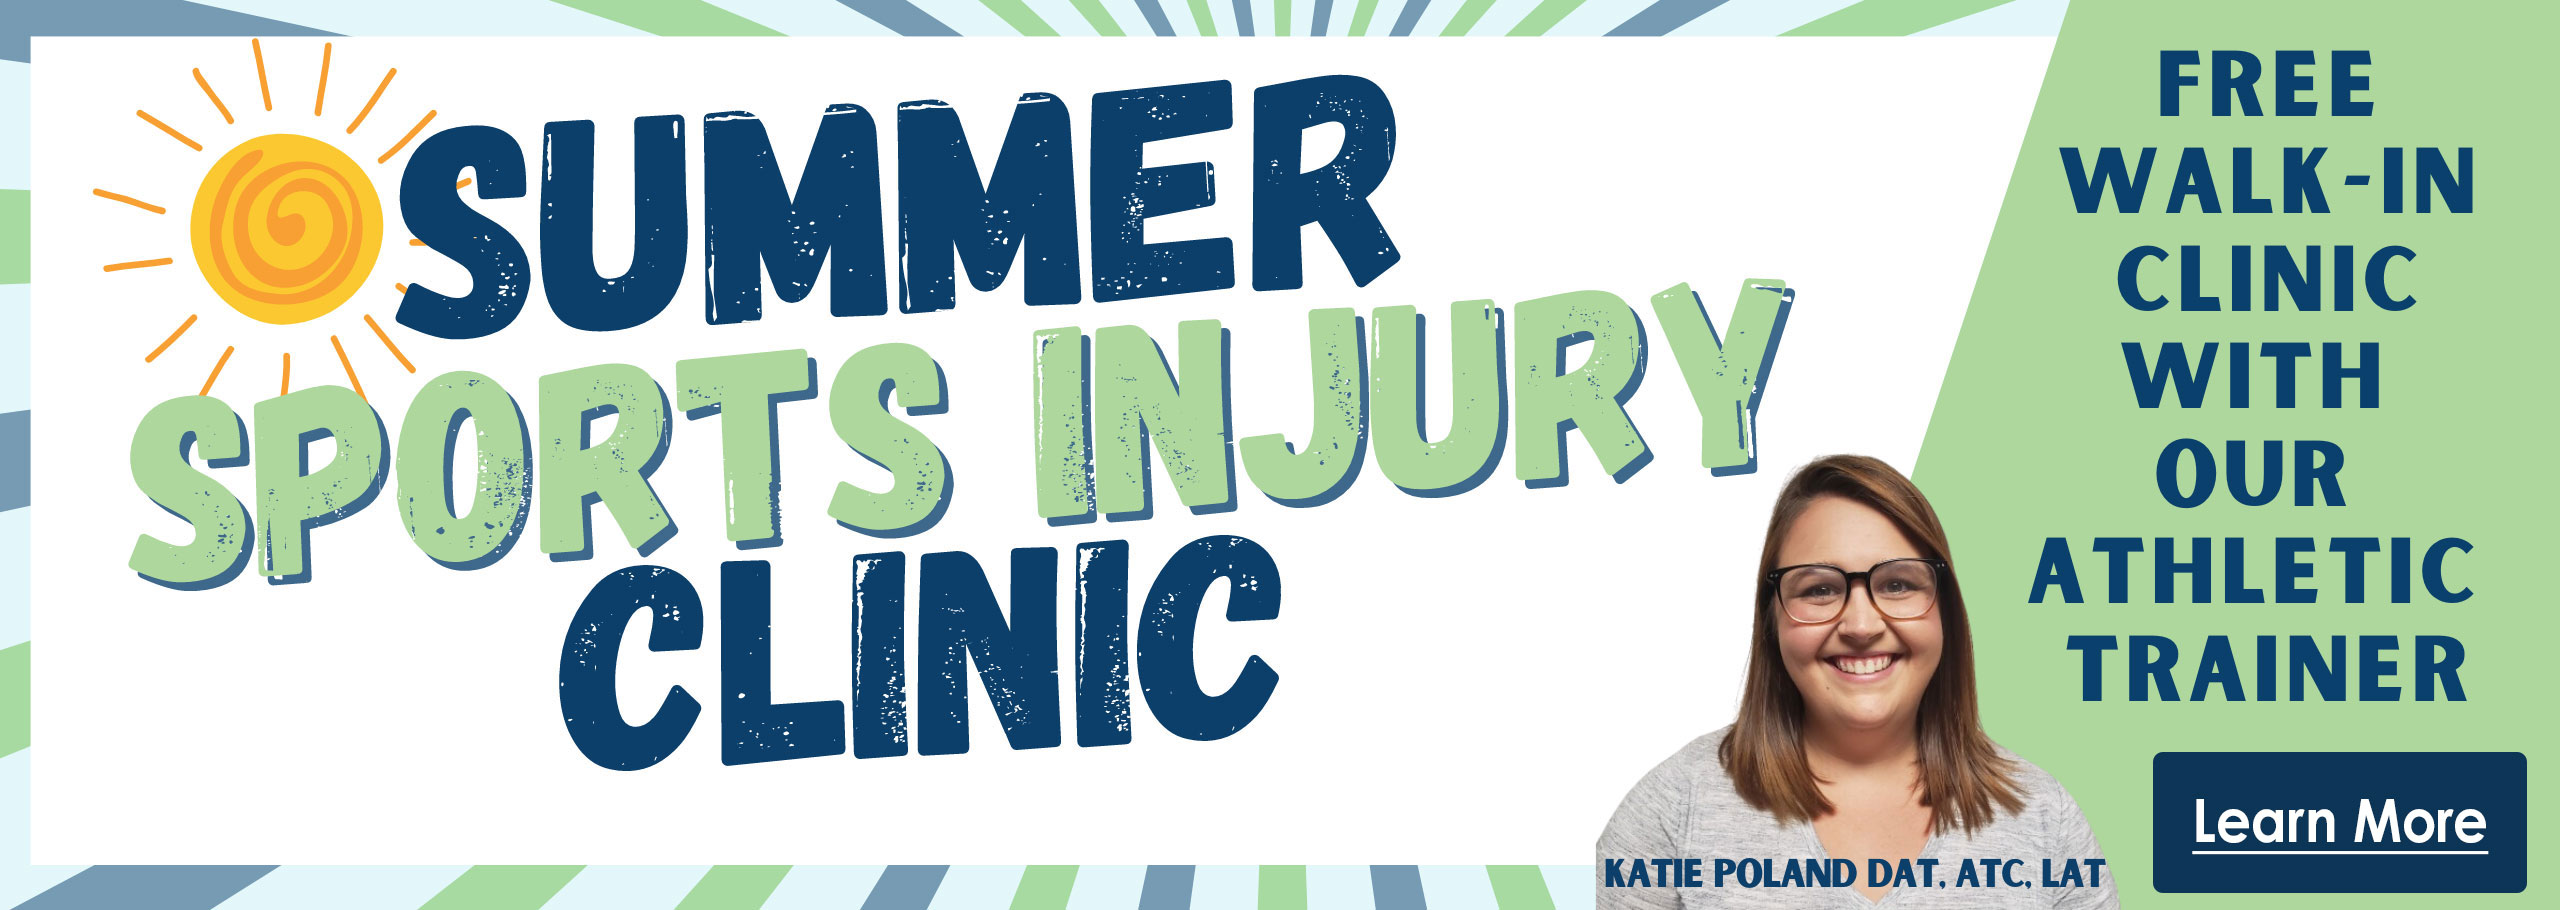 sports clinic with photo of athletic trainer